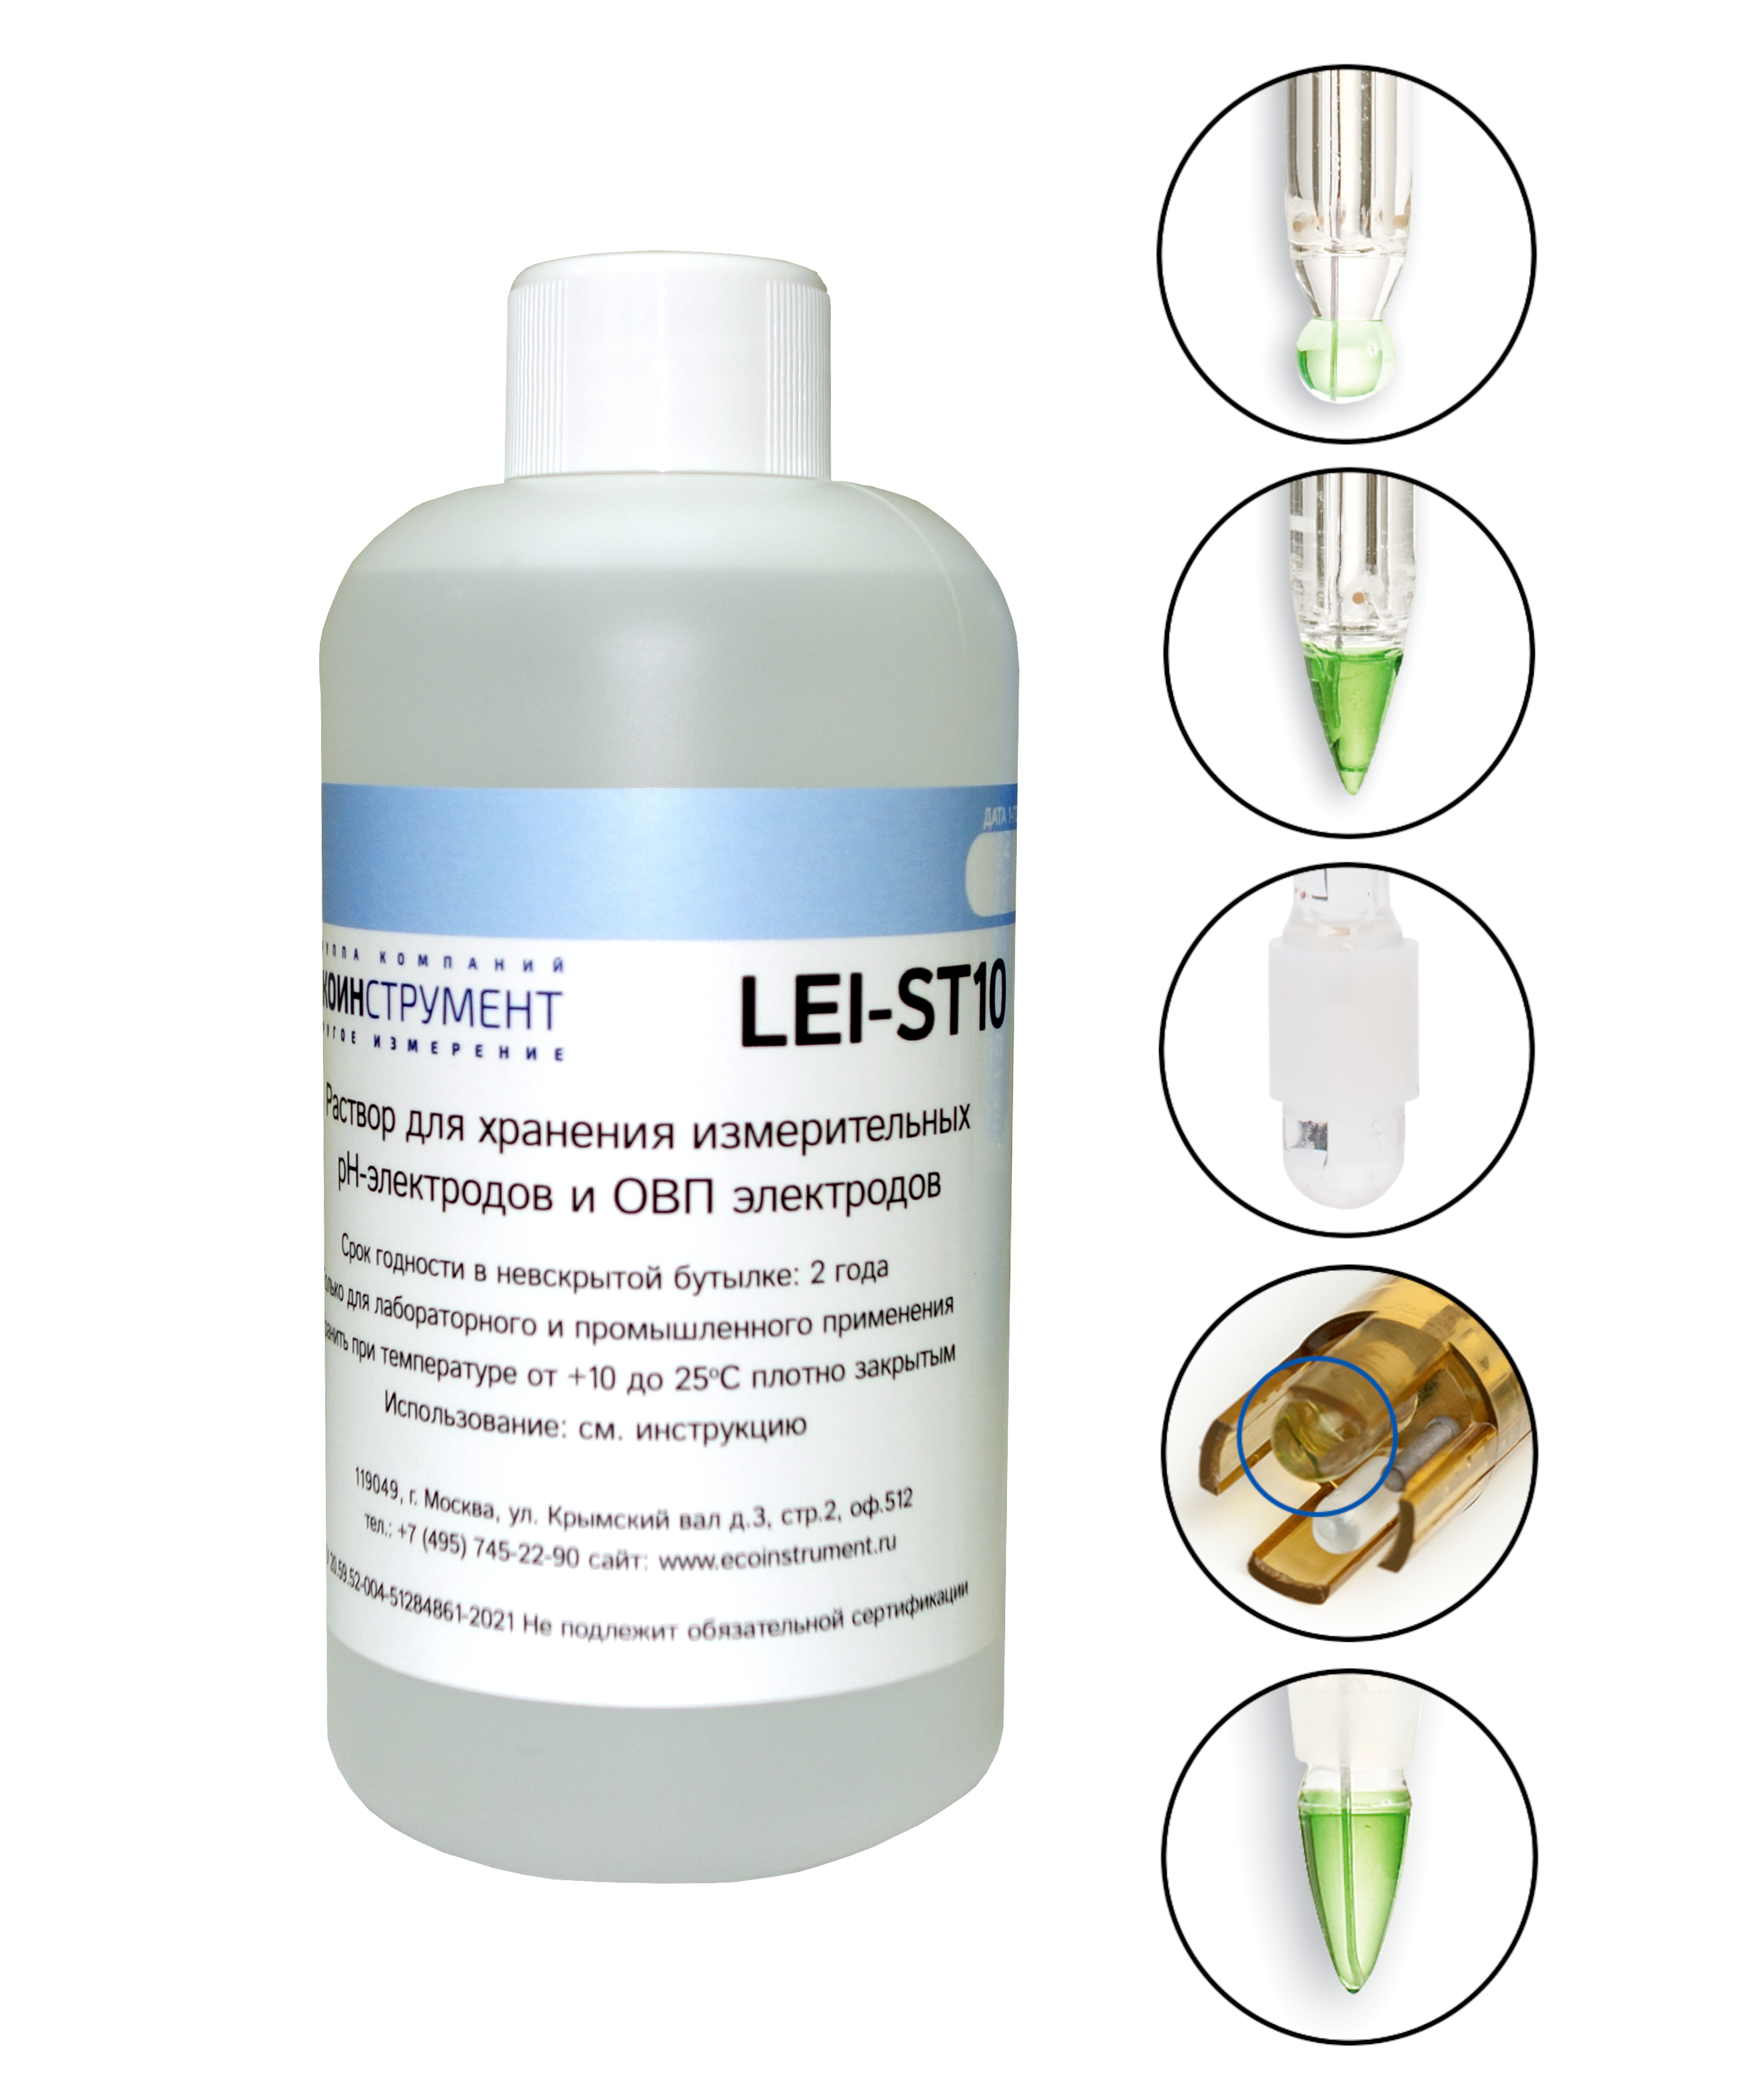 LEI-ST10 Solution for storage of pH and ORP electrodes